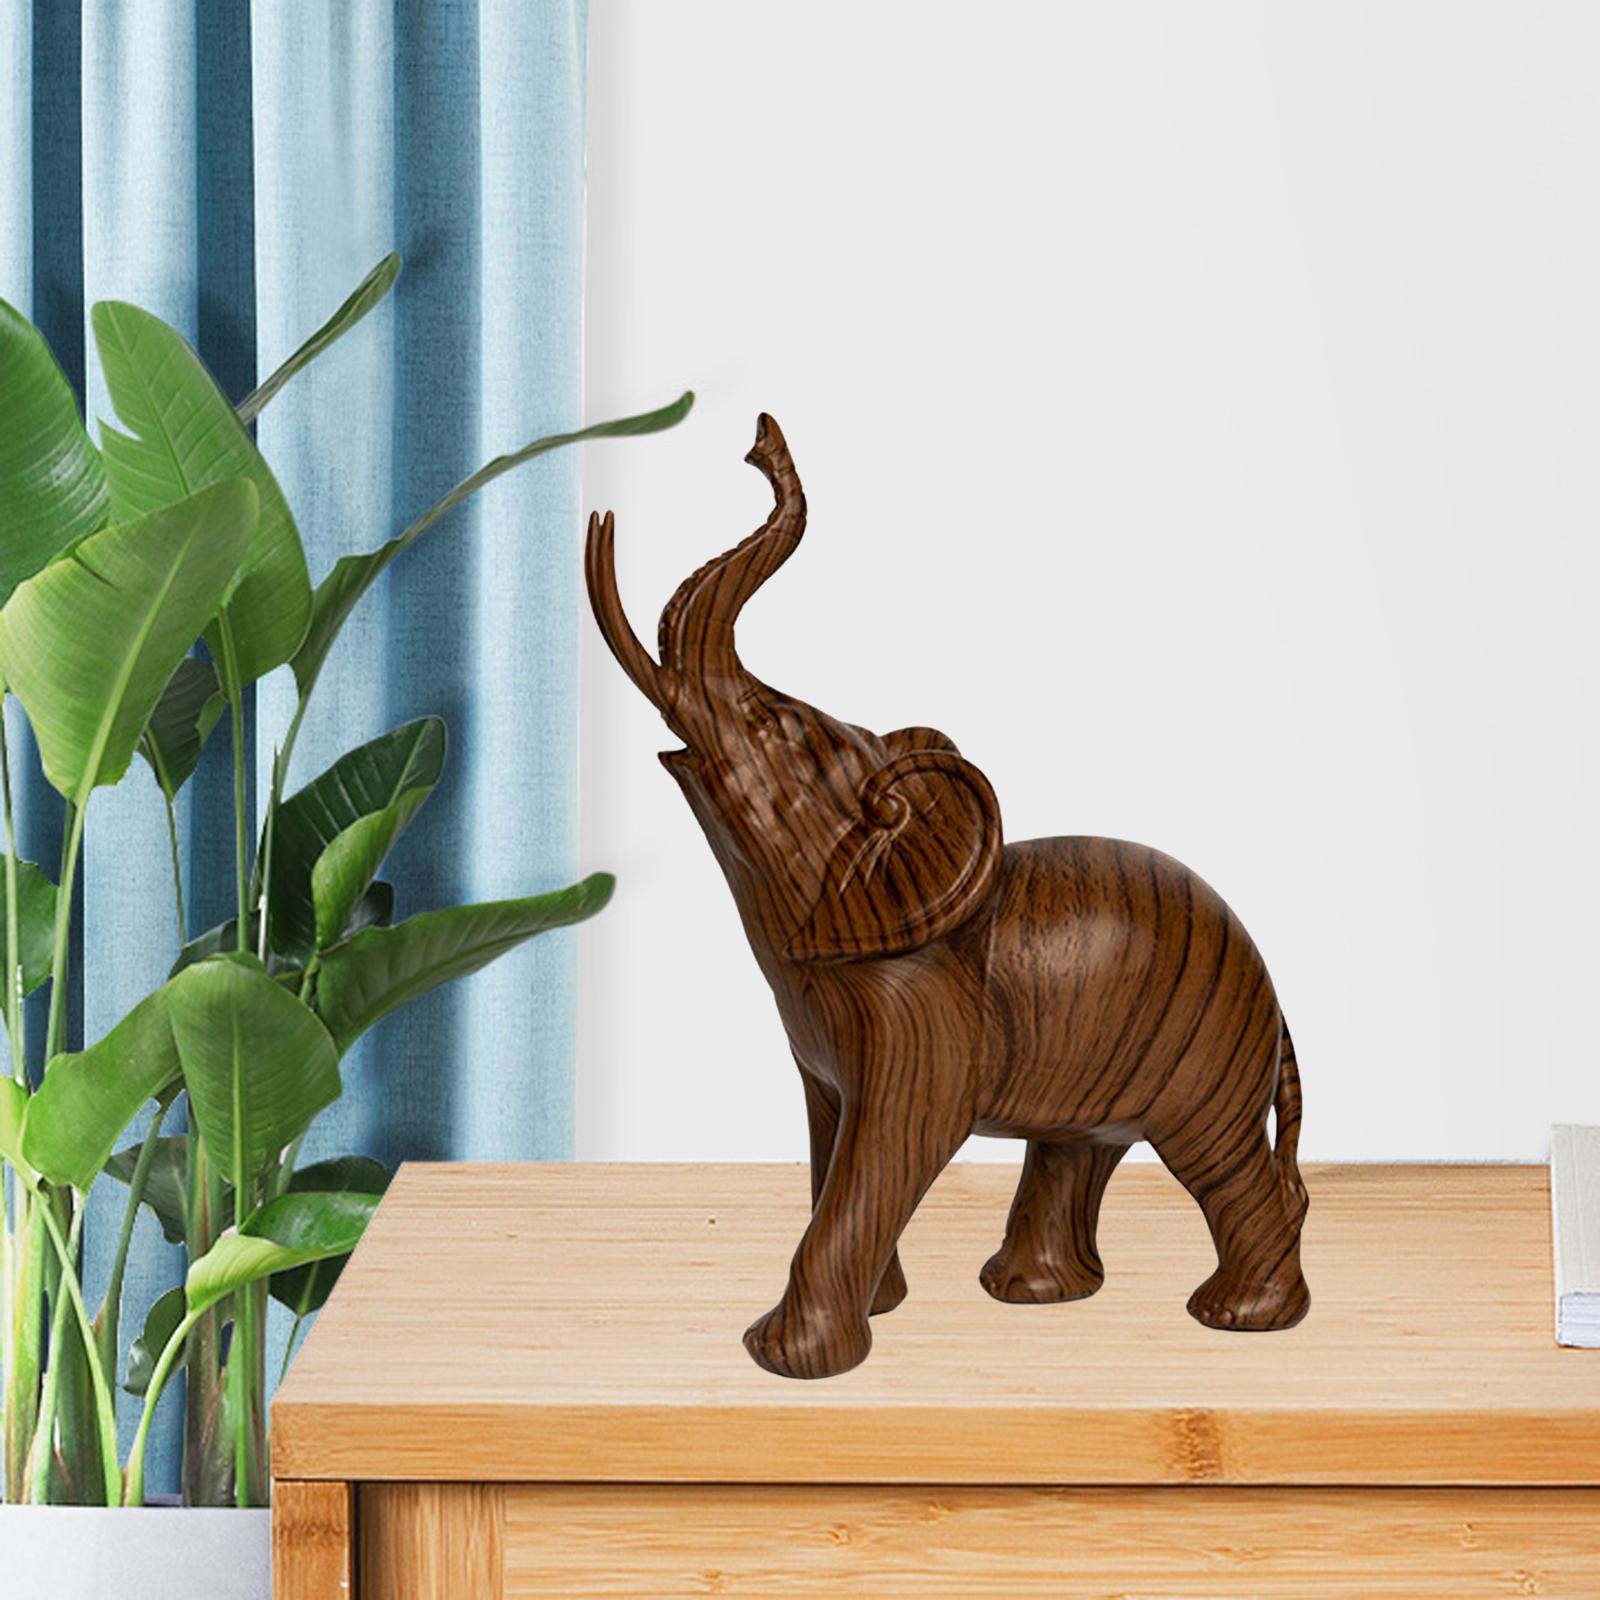 Resin Figurines Sculptures Living Room Souvenirs Gifts Elephant Statues Brown